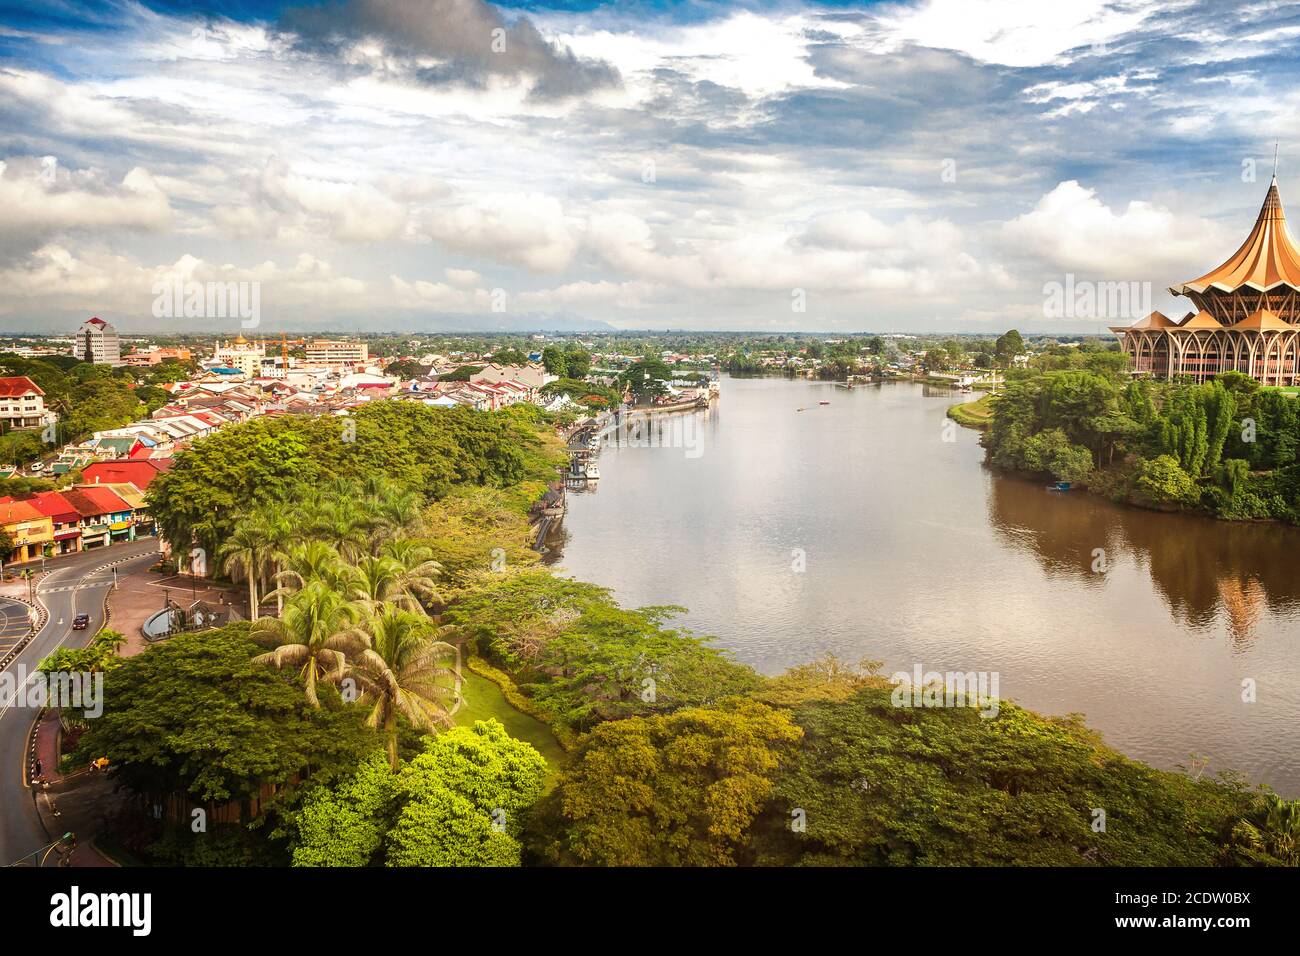 View across the Sarawak River to the southern and northern sides of the city of Kuching with the Wat Stock Photo